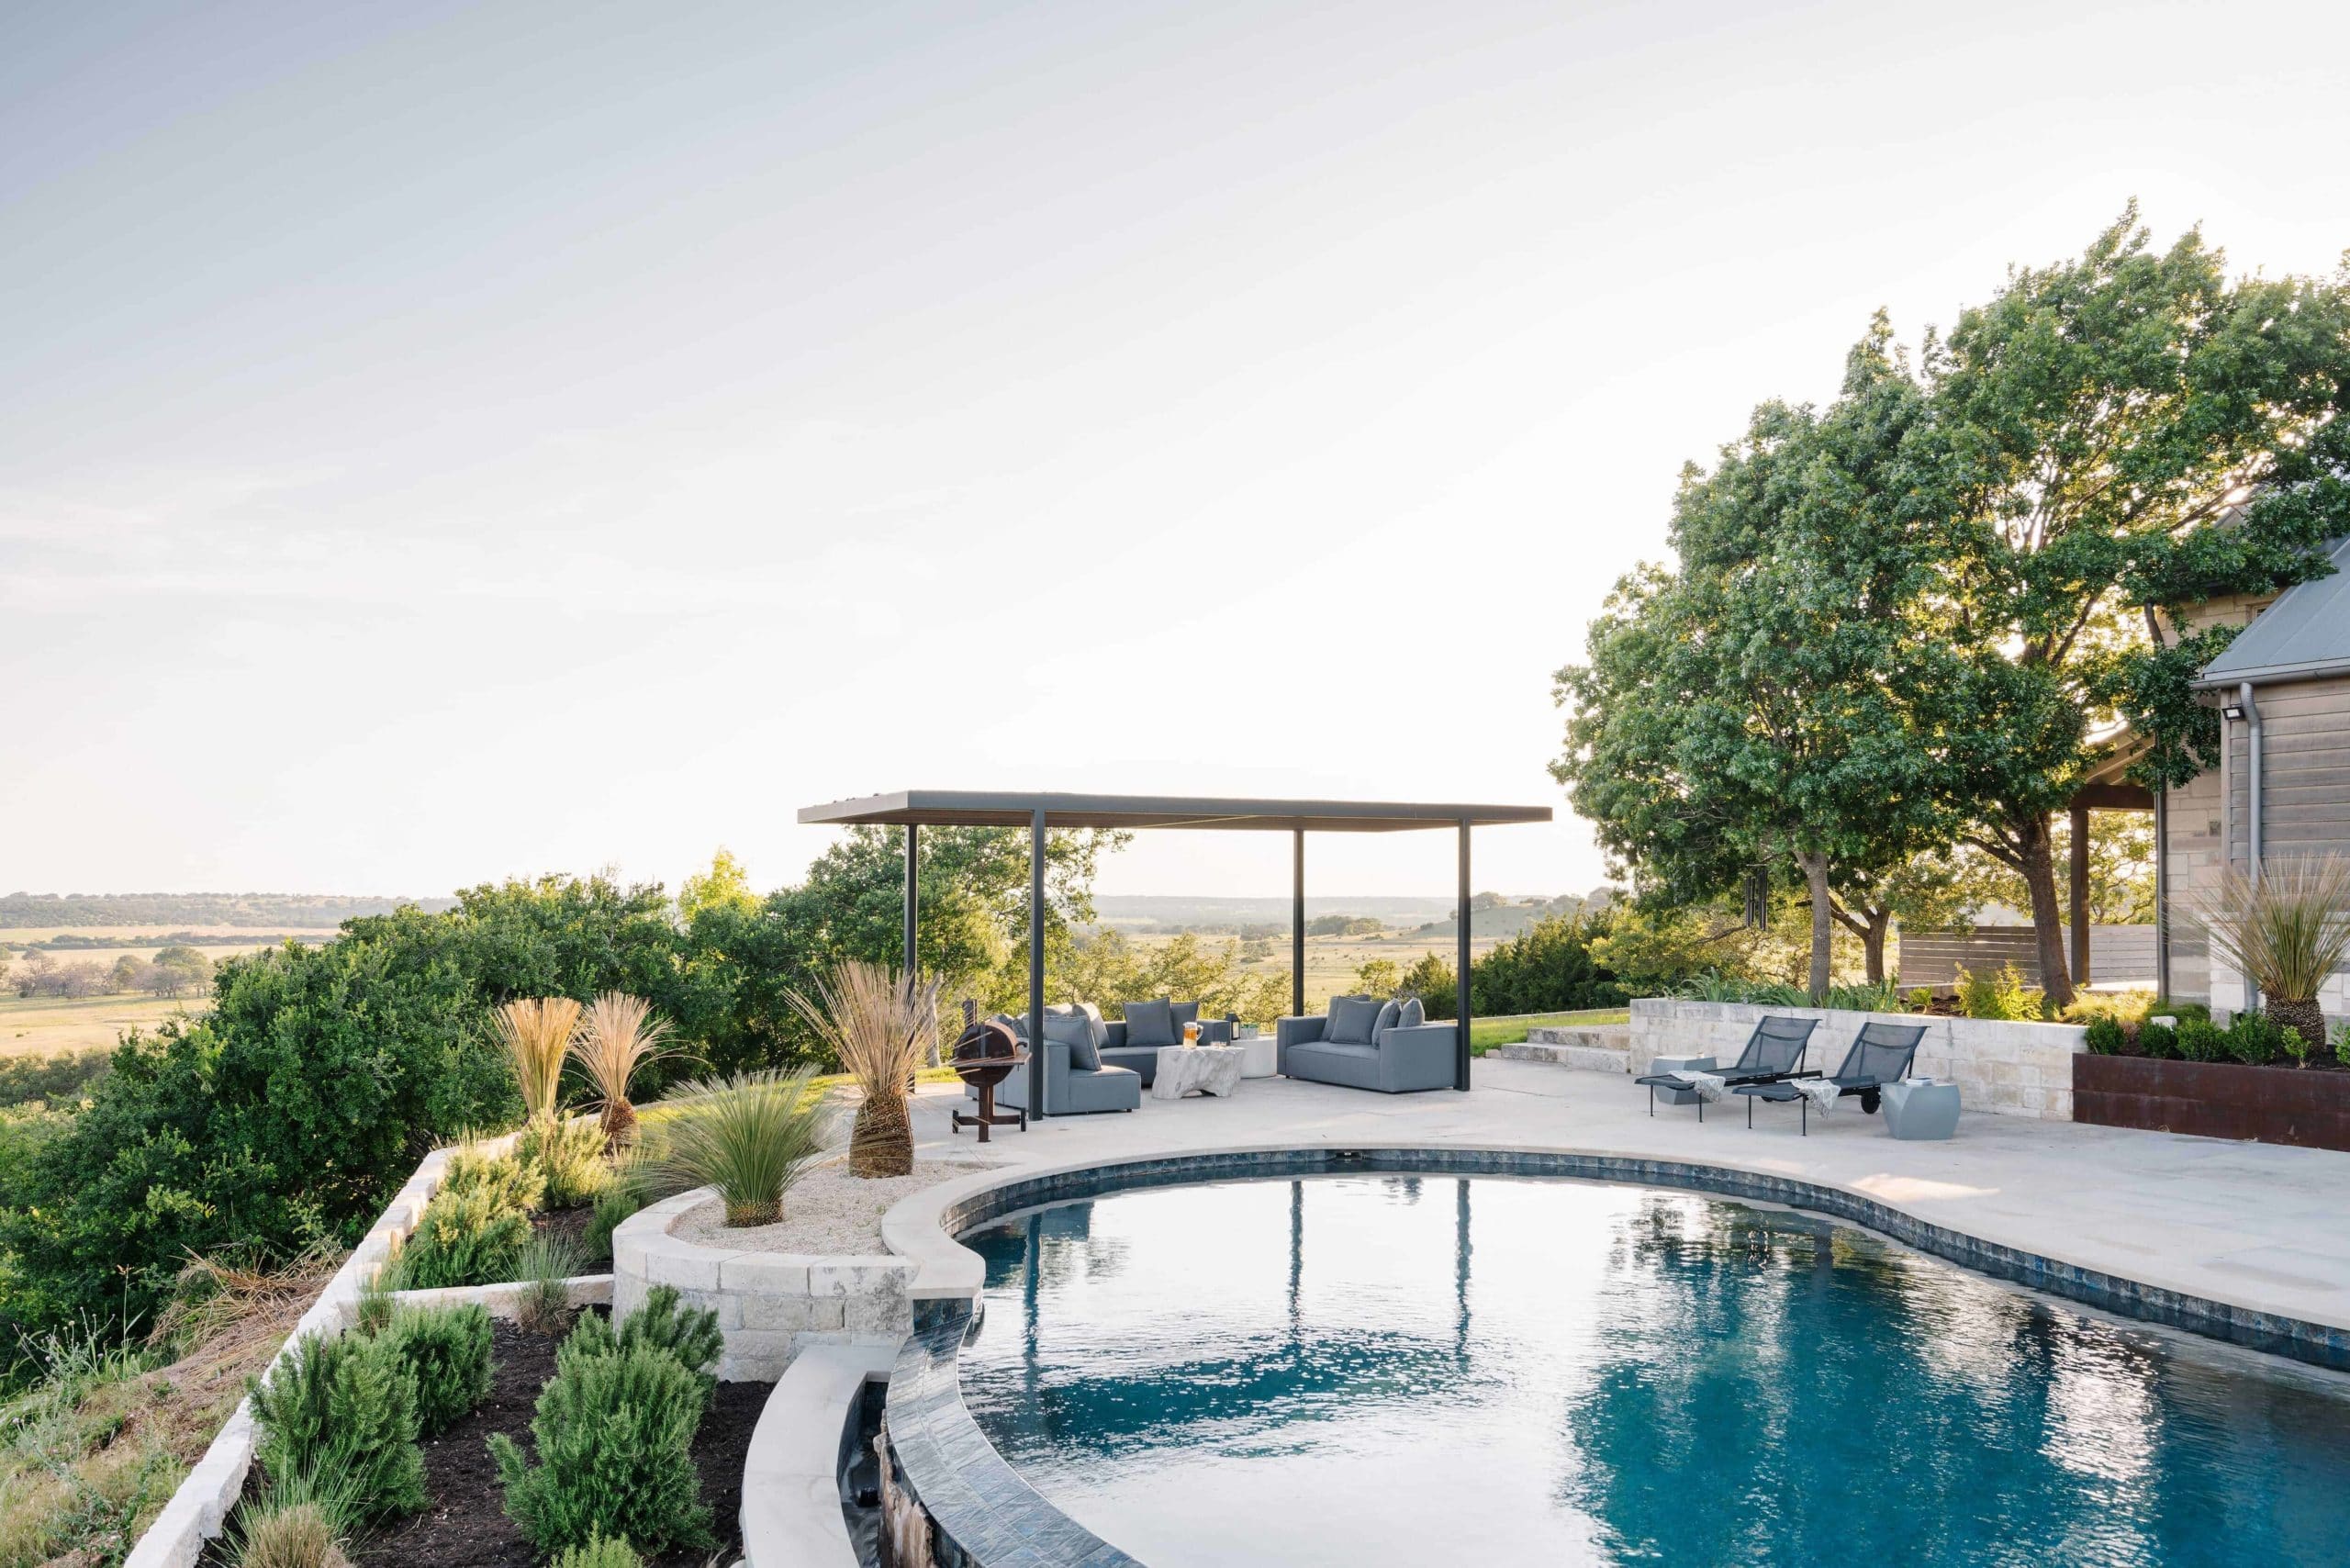 Beautiful pool with hill country view